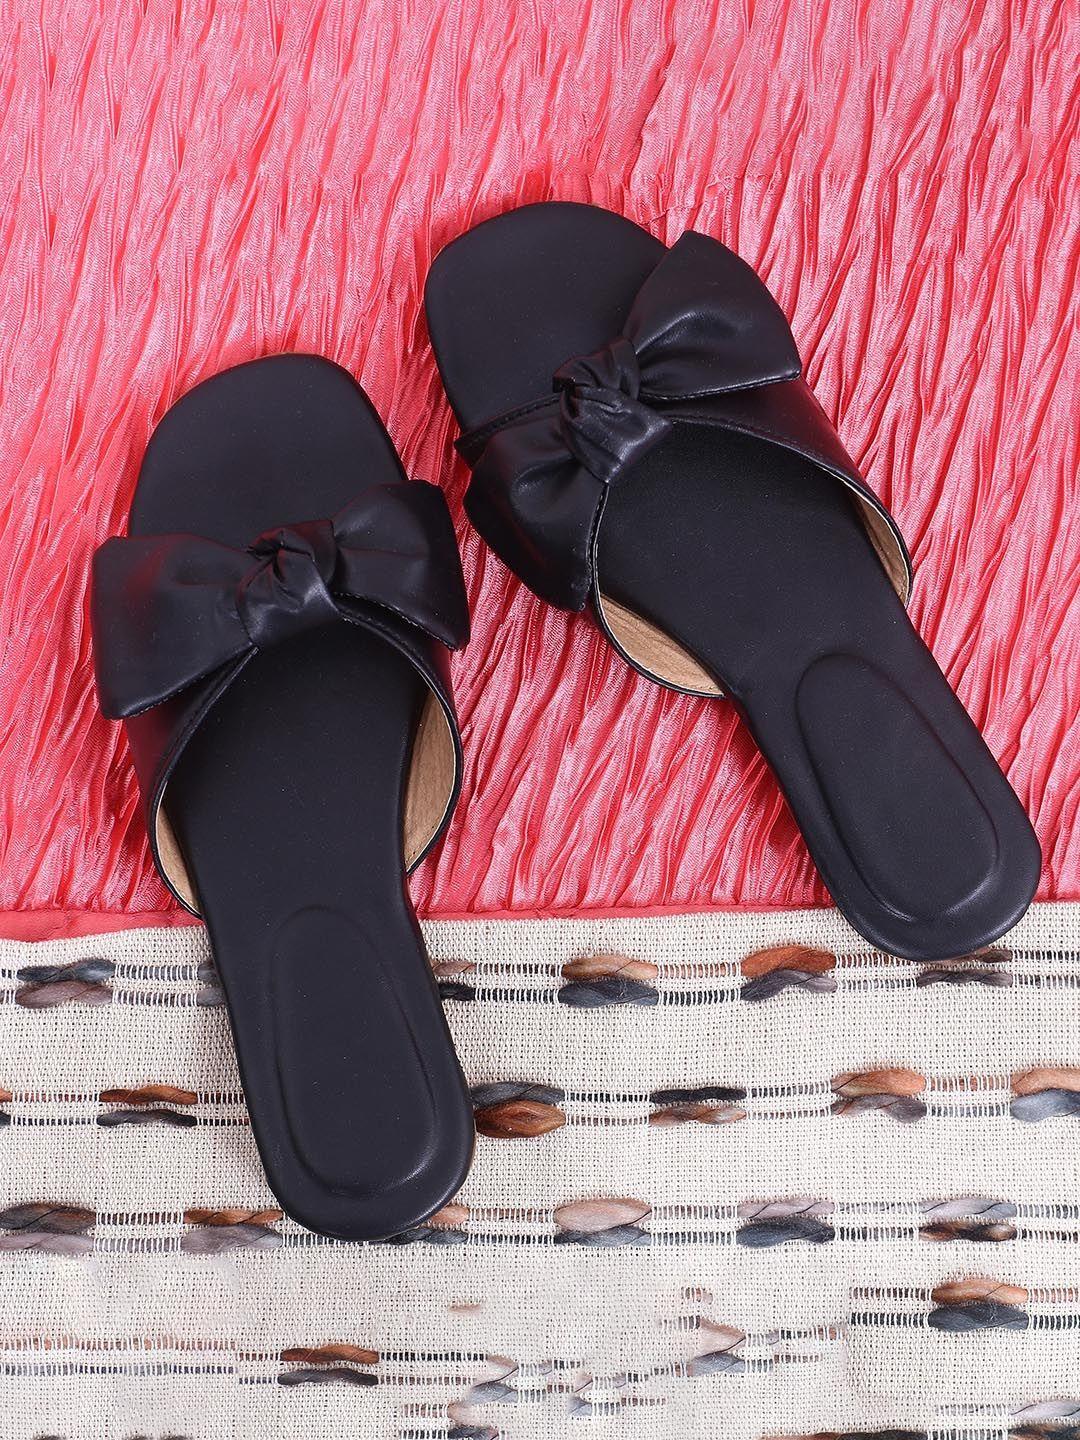 ravis open toe flats with bows